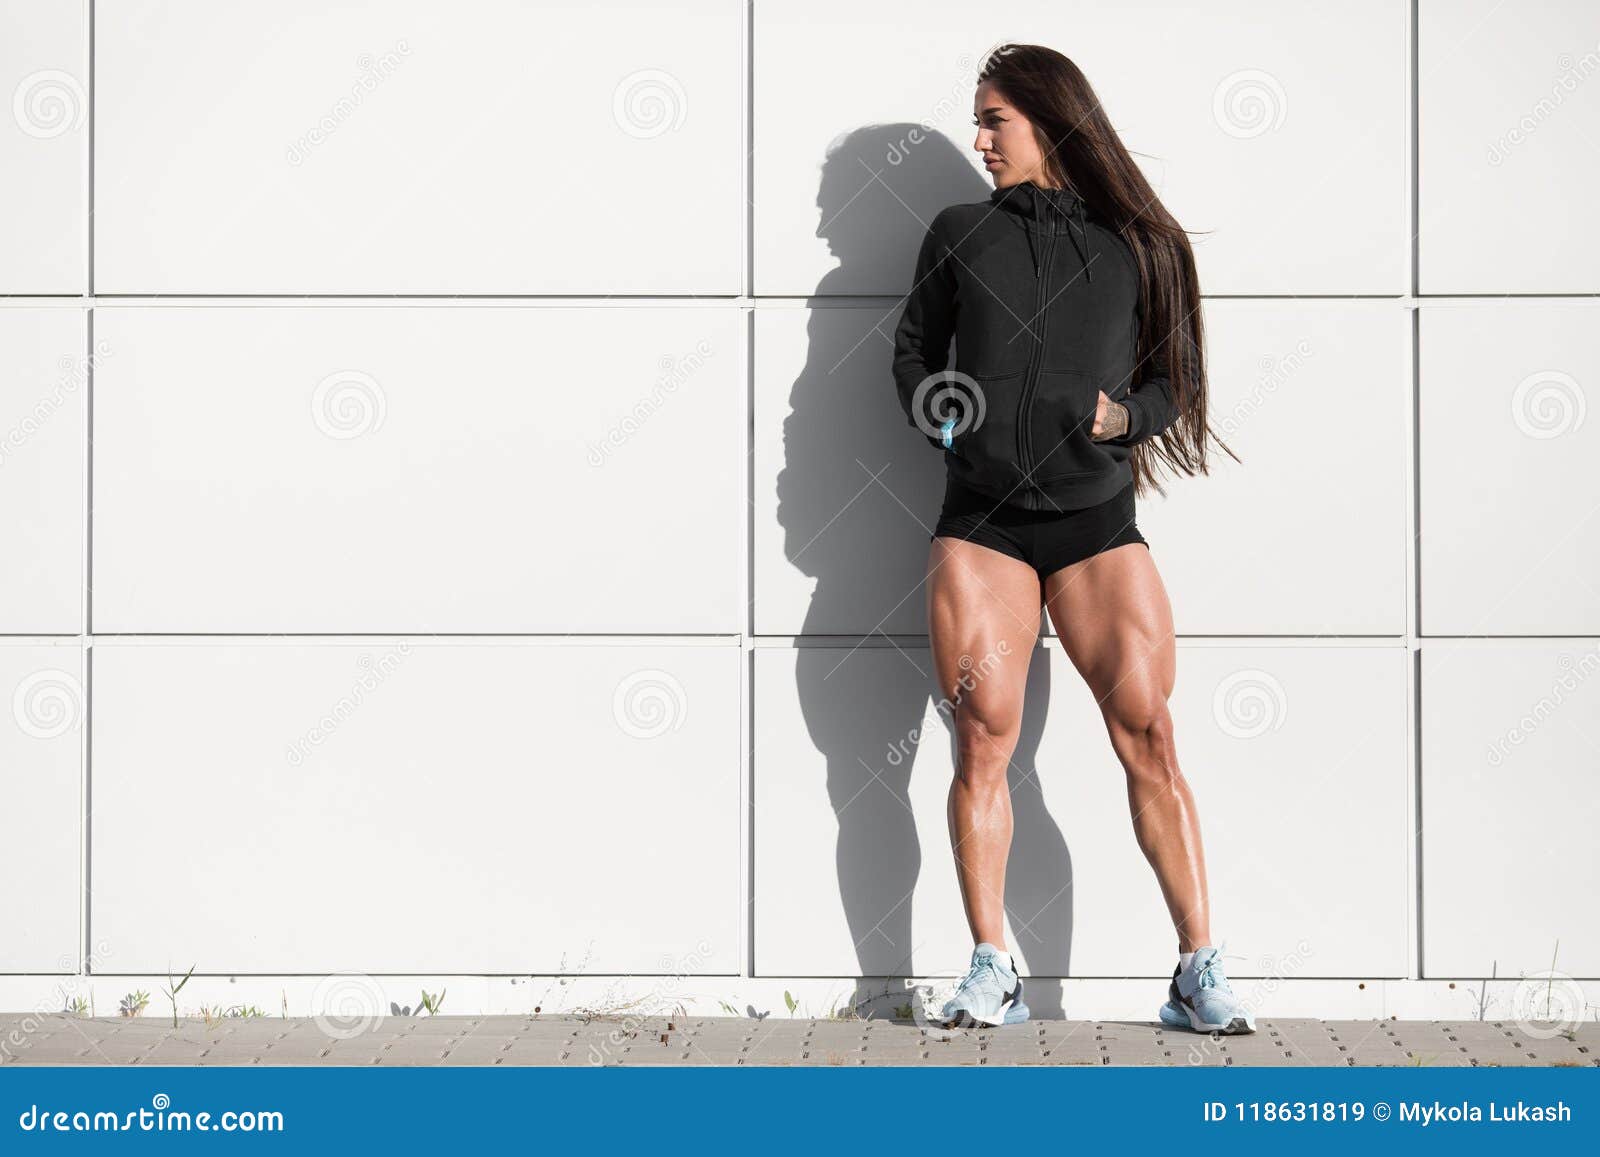 christina viray recommends female muscular legs calves pic